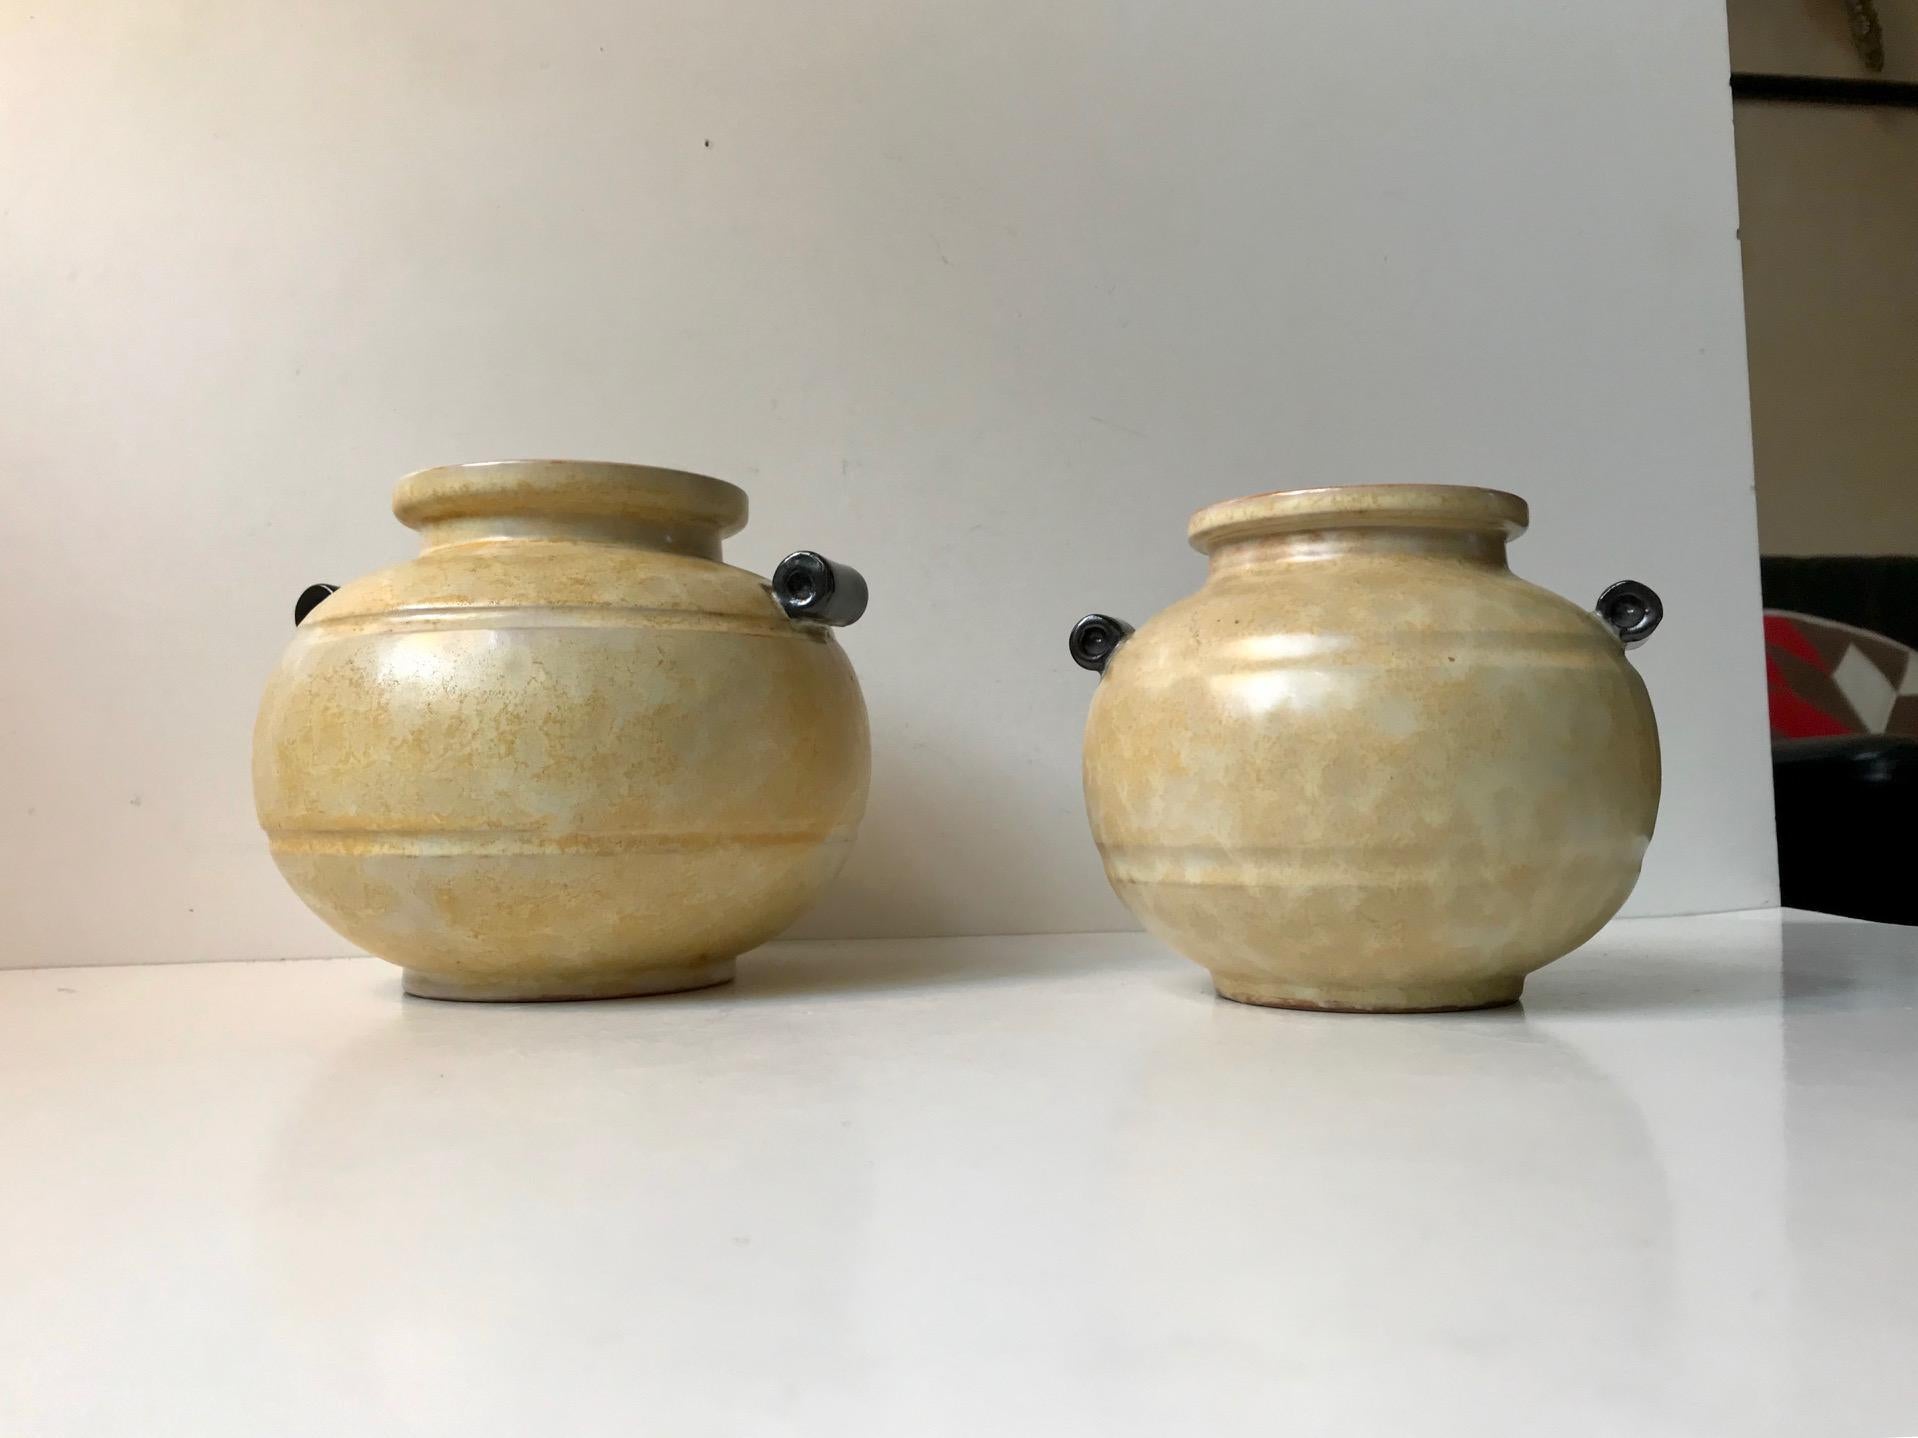 A matching set of handled art deco pottery vases in earthy pastel glazes. Designed by Harald Ostergren and manufactured by Ekeby in Uppsala Sweden during the 1930s. The vases have the model numbers: 2750 and 2751- hence the slight difference in